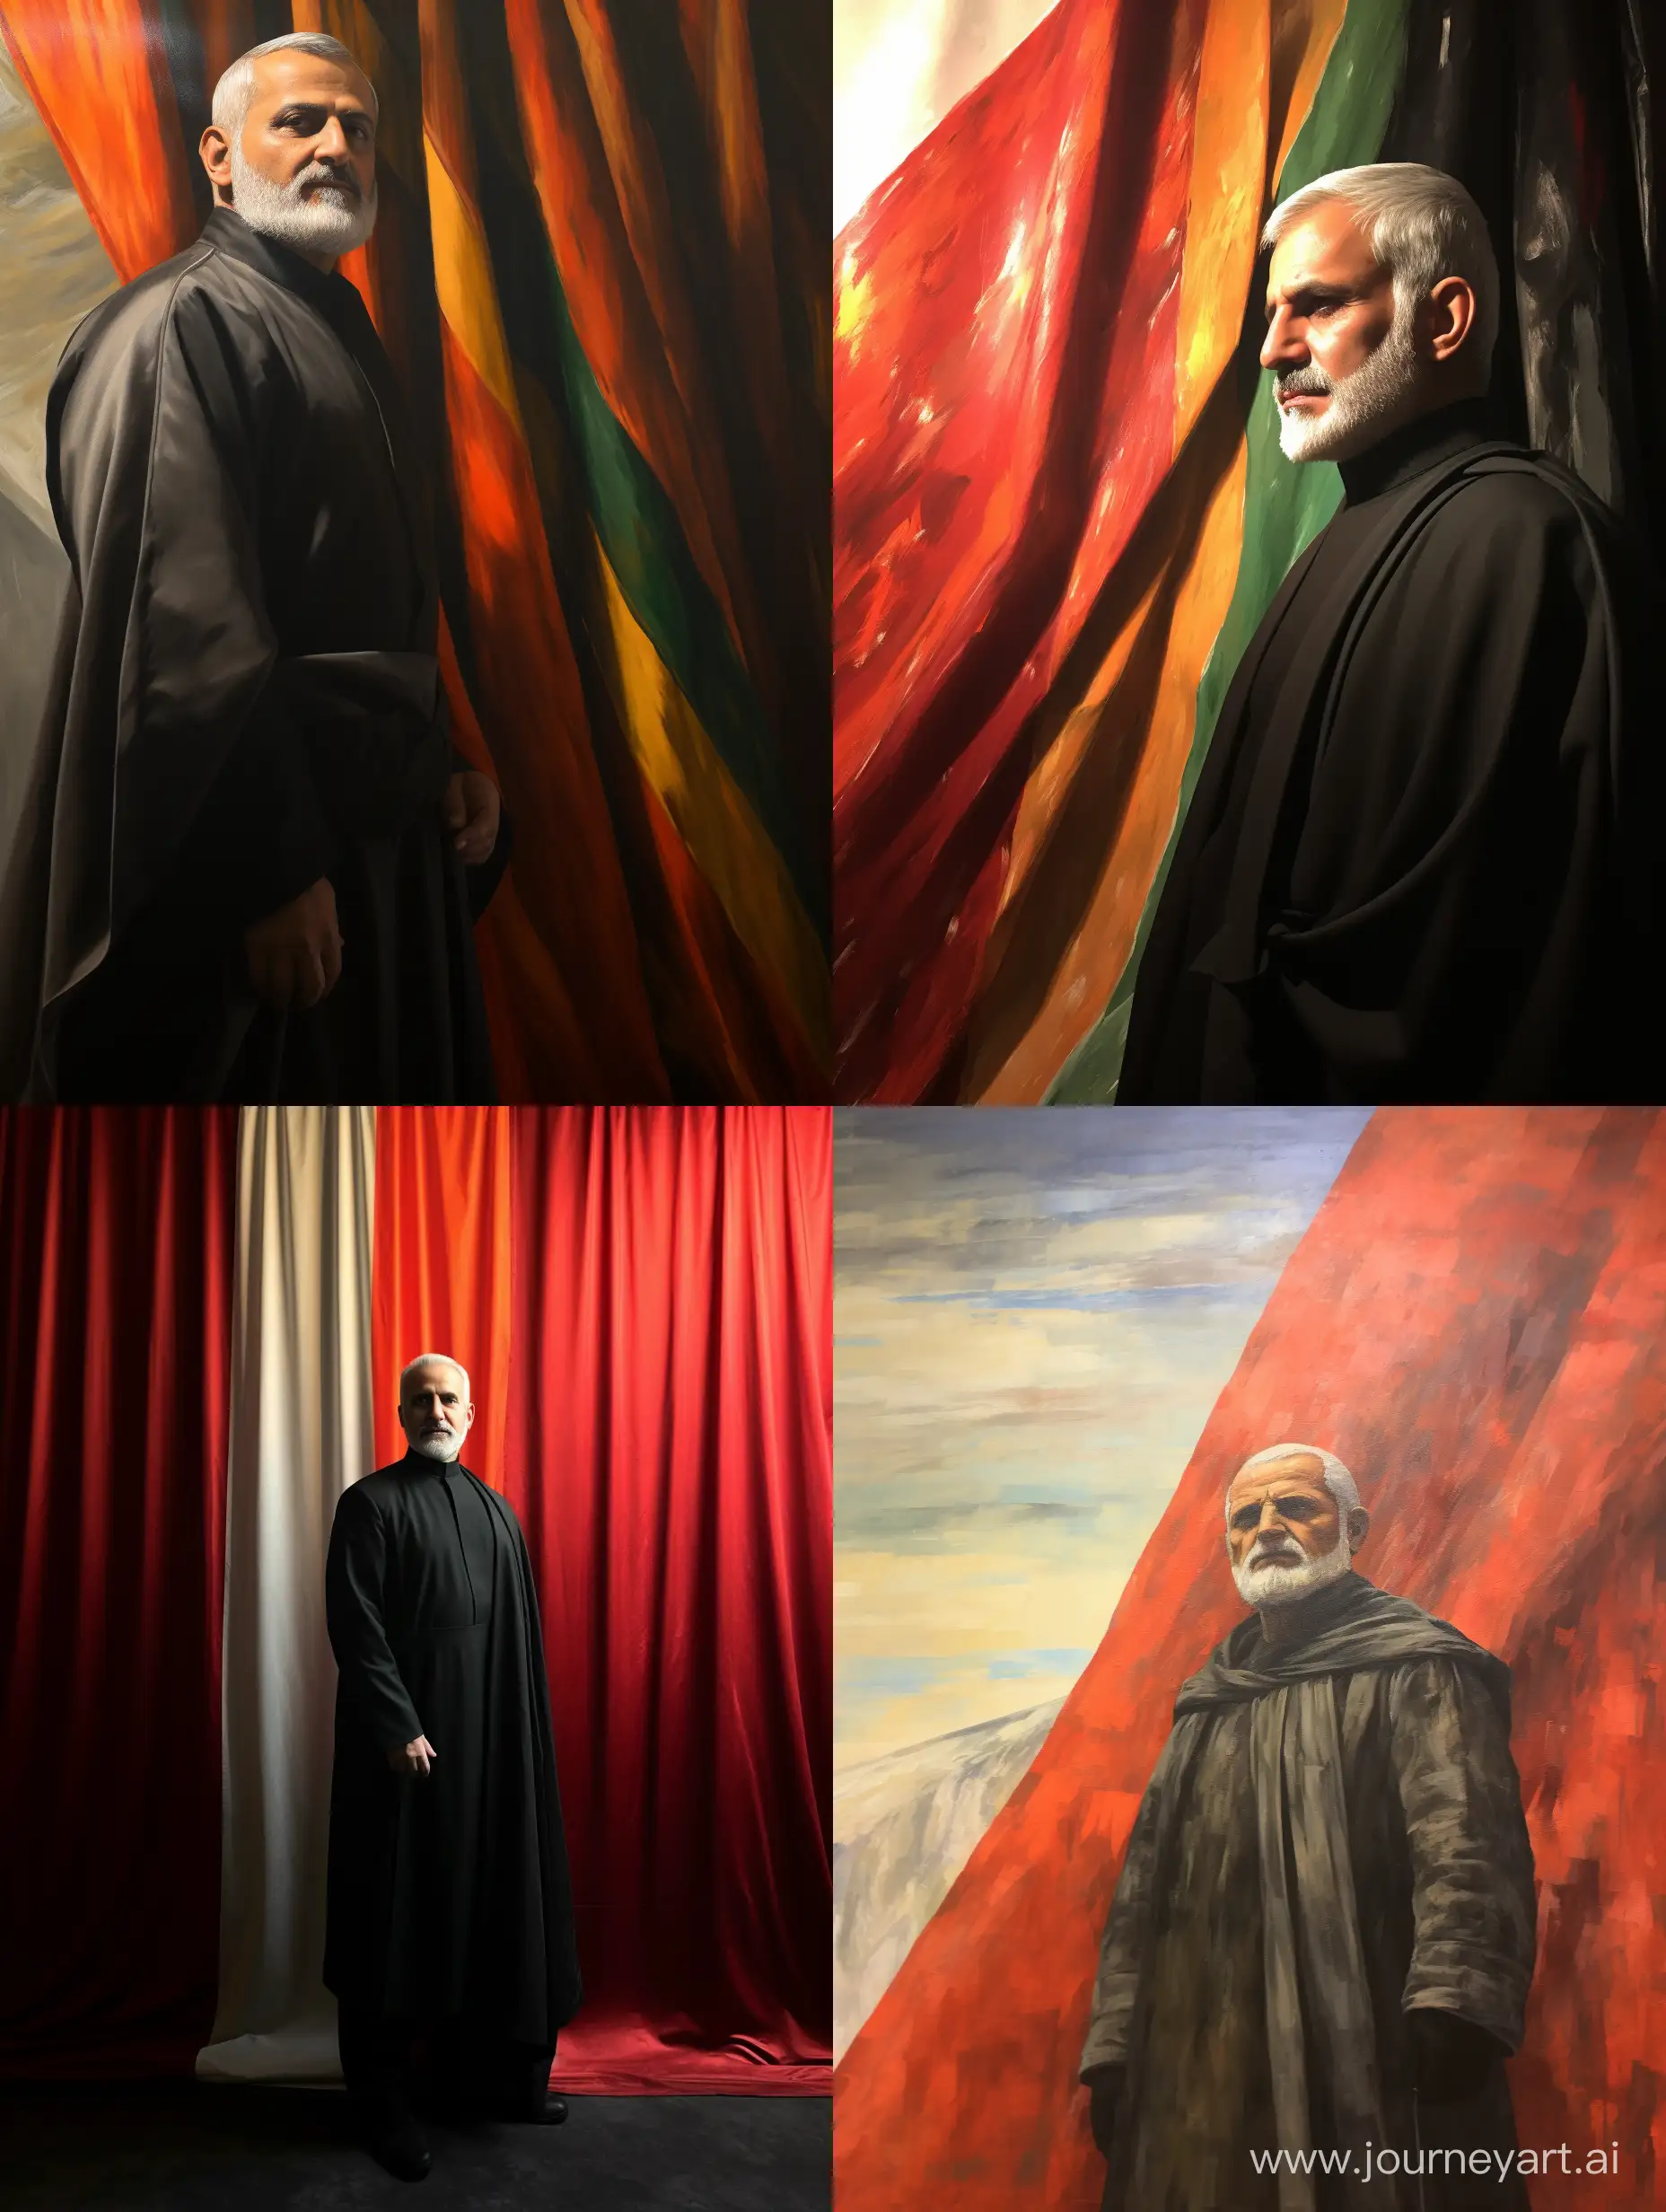 qasem soleimani, standing infront of the iranian flag, high quality